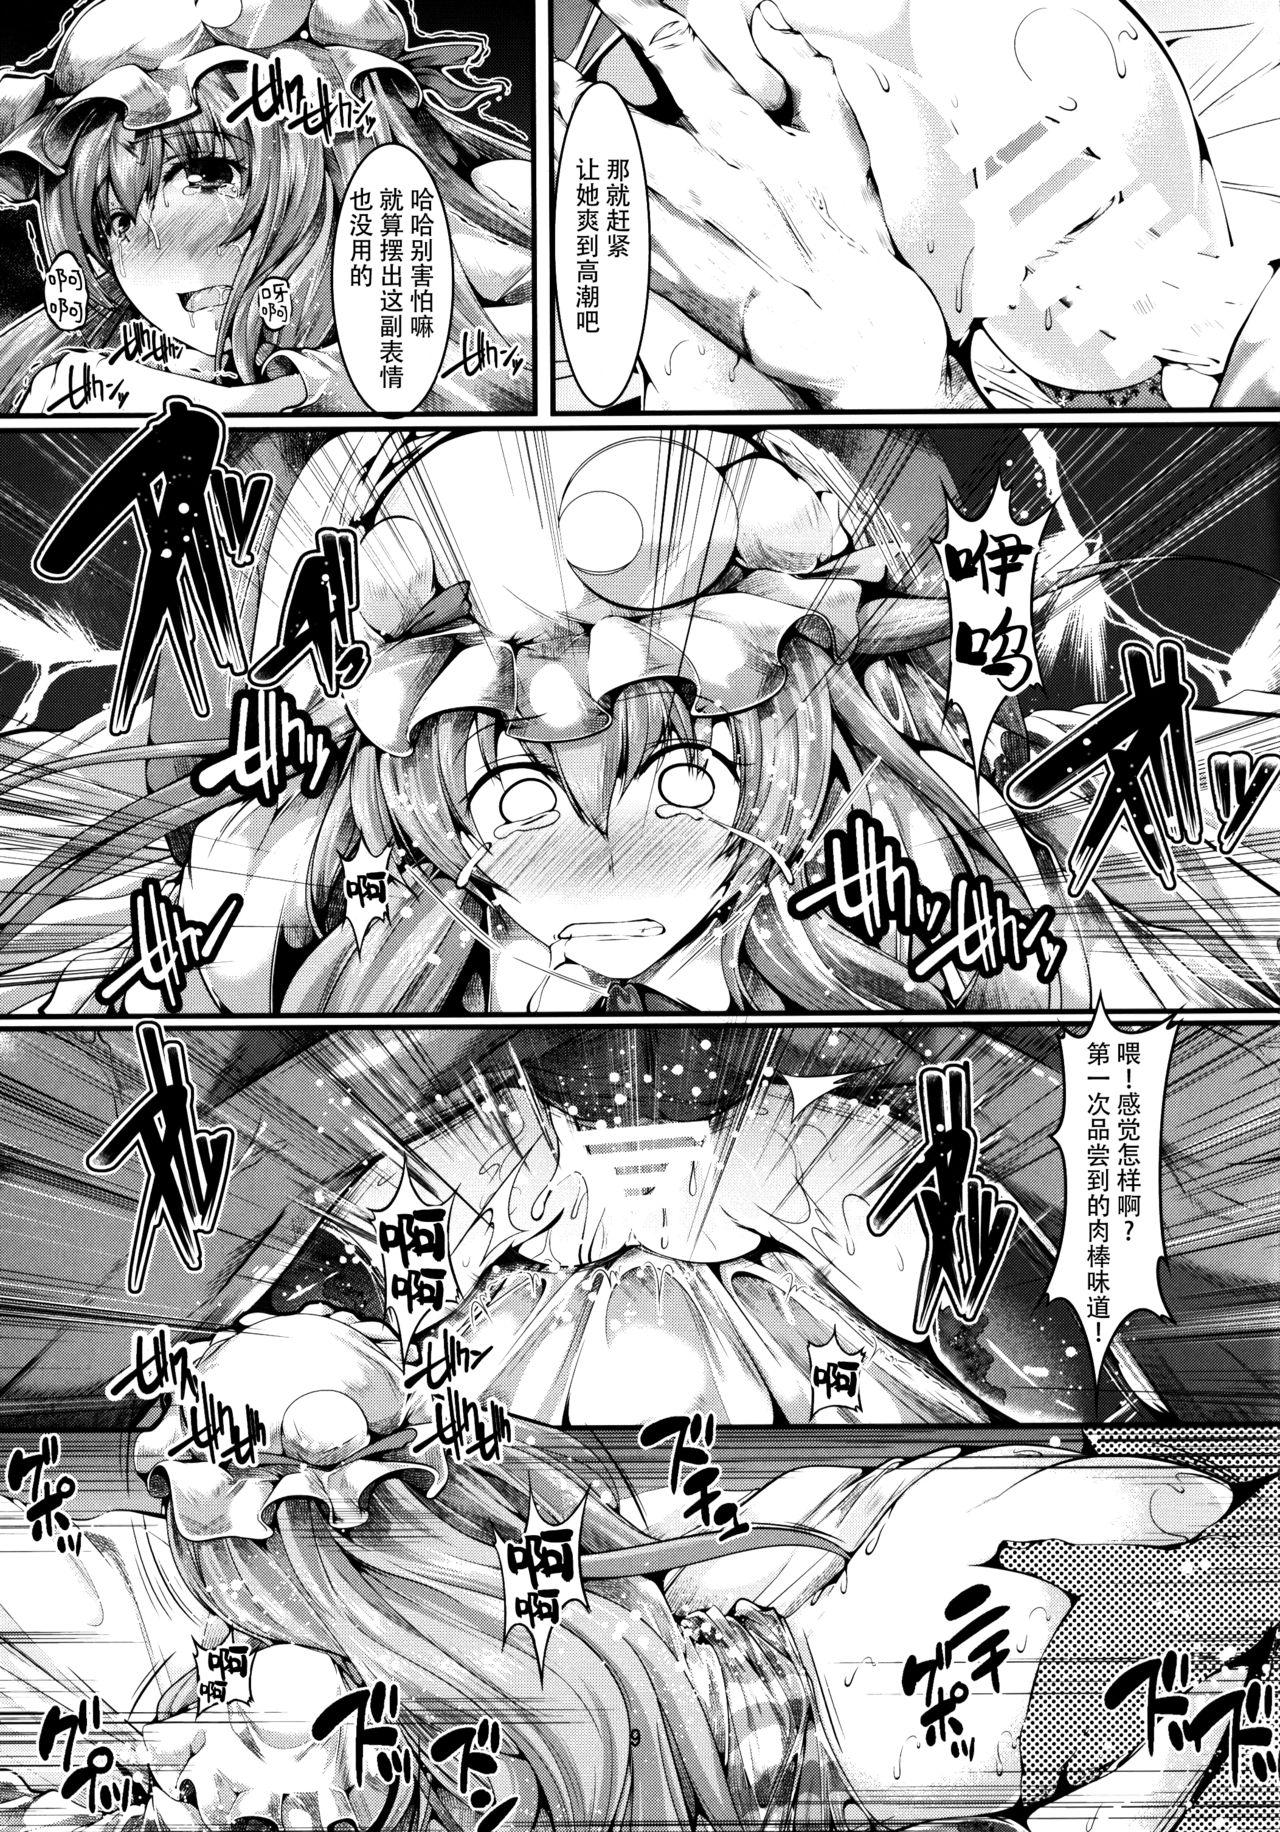 Staxxx NO! NO! KNOWLEDGE! - Touhou project Boquete - Page 8